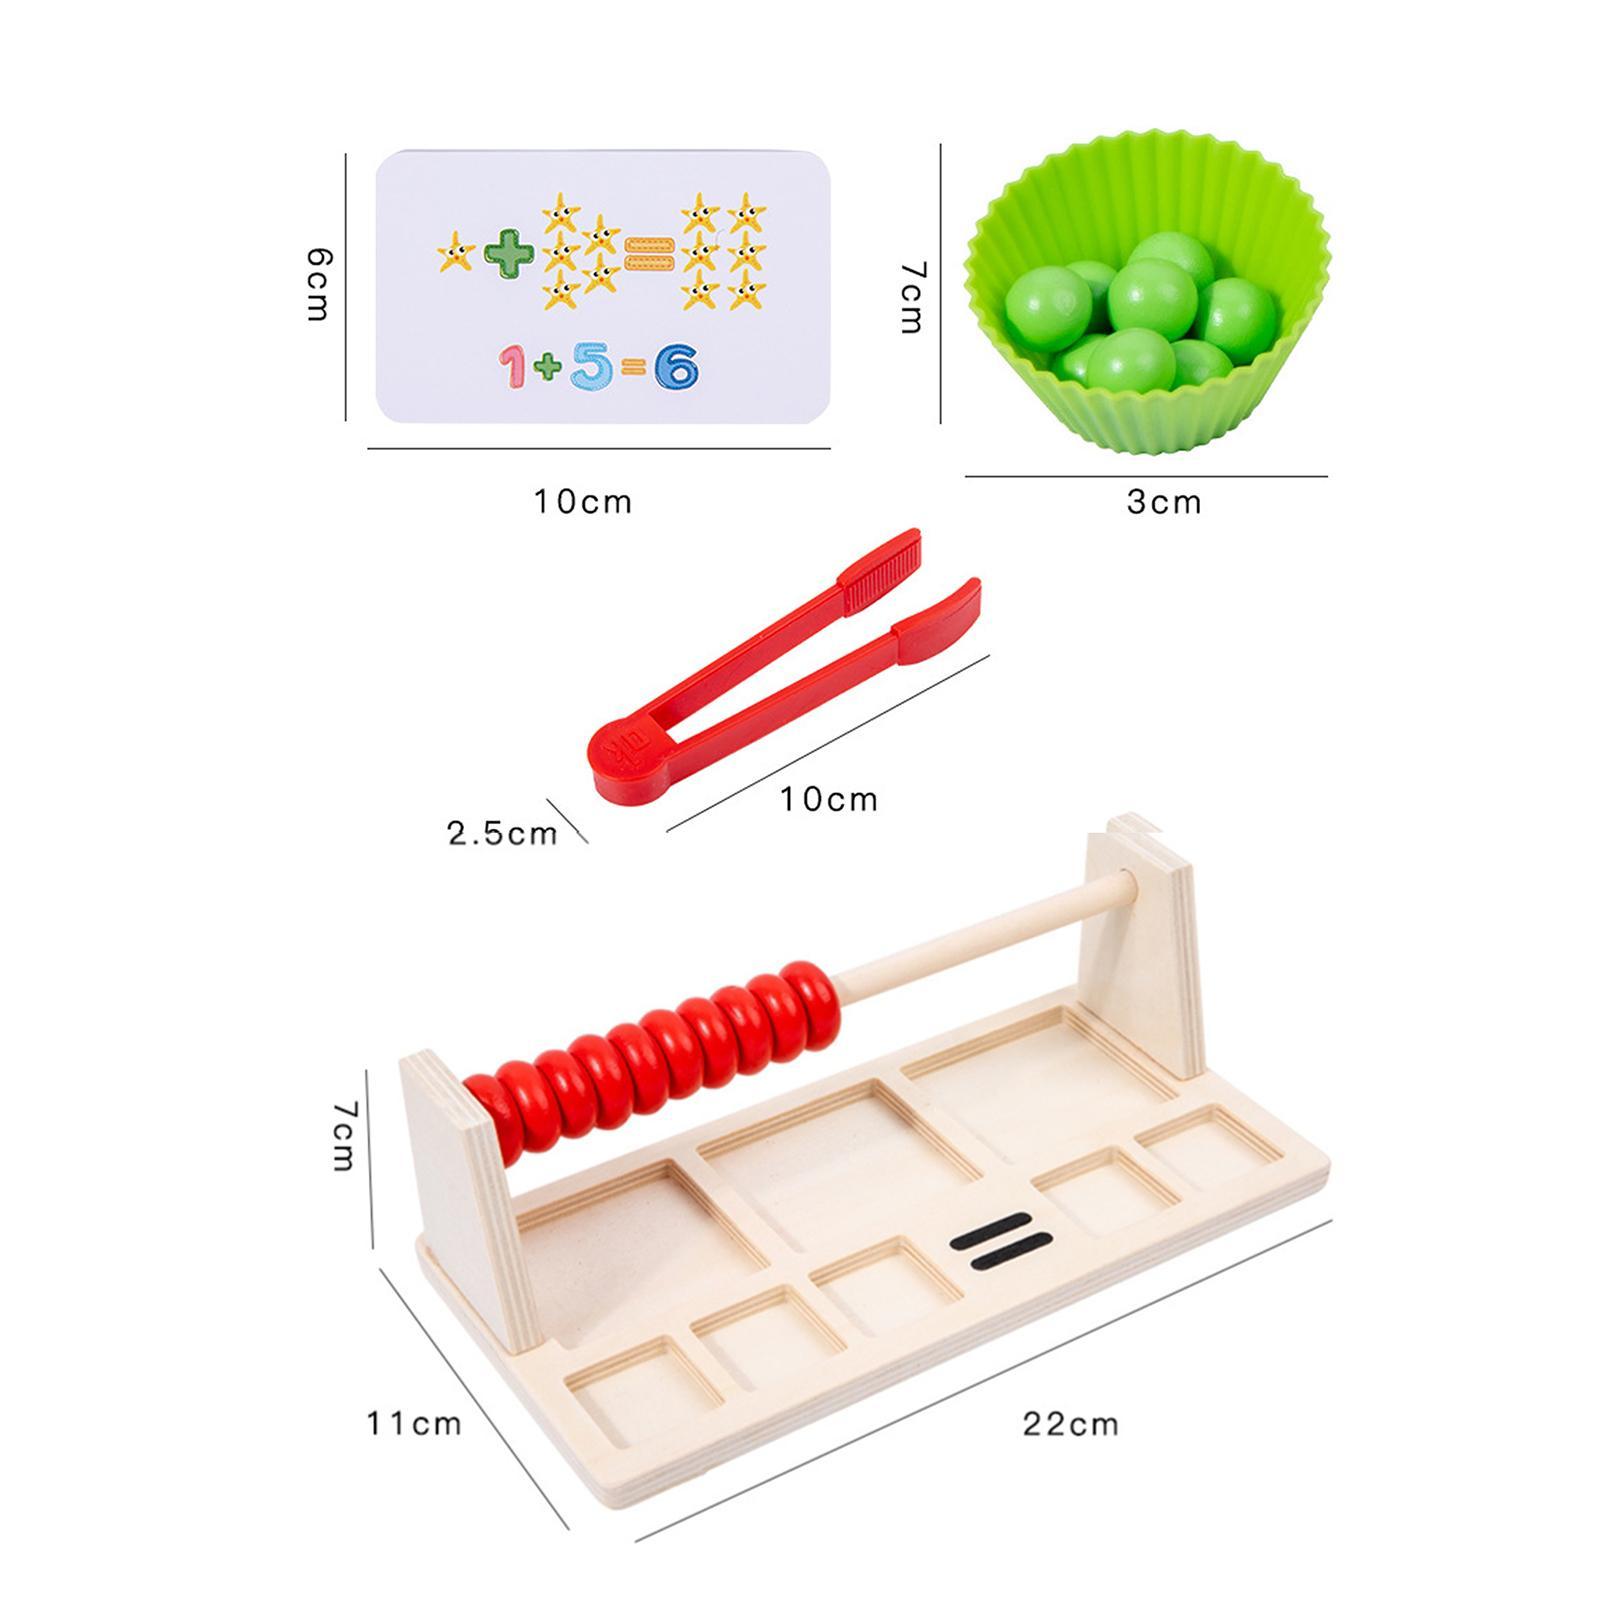 Learning Math Toy Gifts Color Sorting Educational Learning Toy Multicolor Teaching Aids Matching Board Wooden Toddler